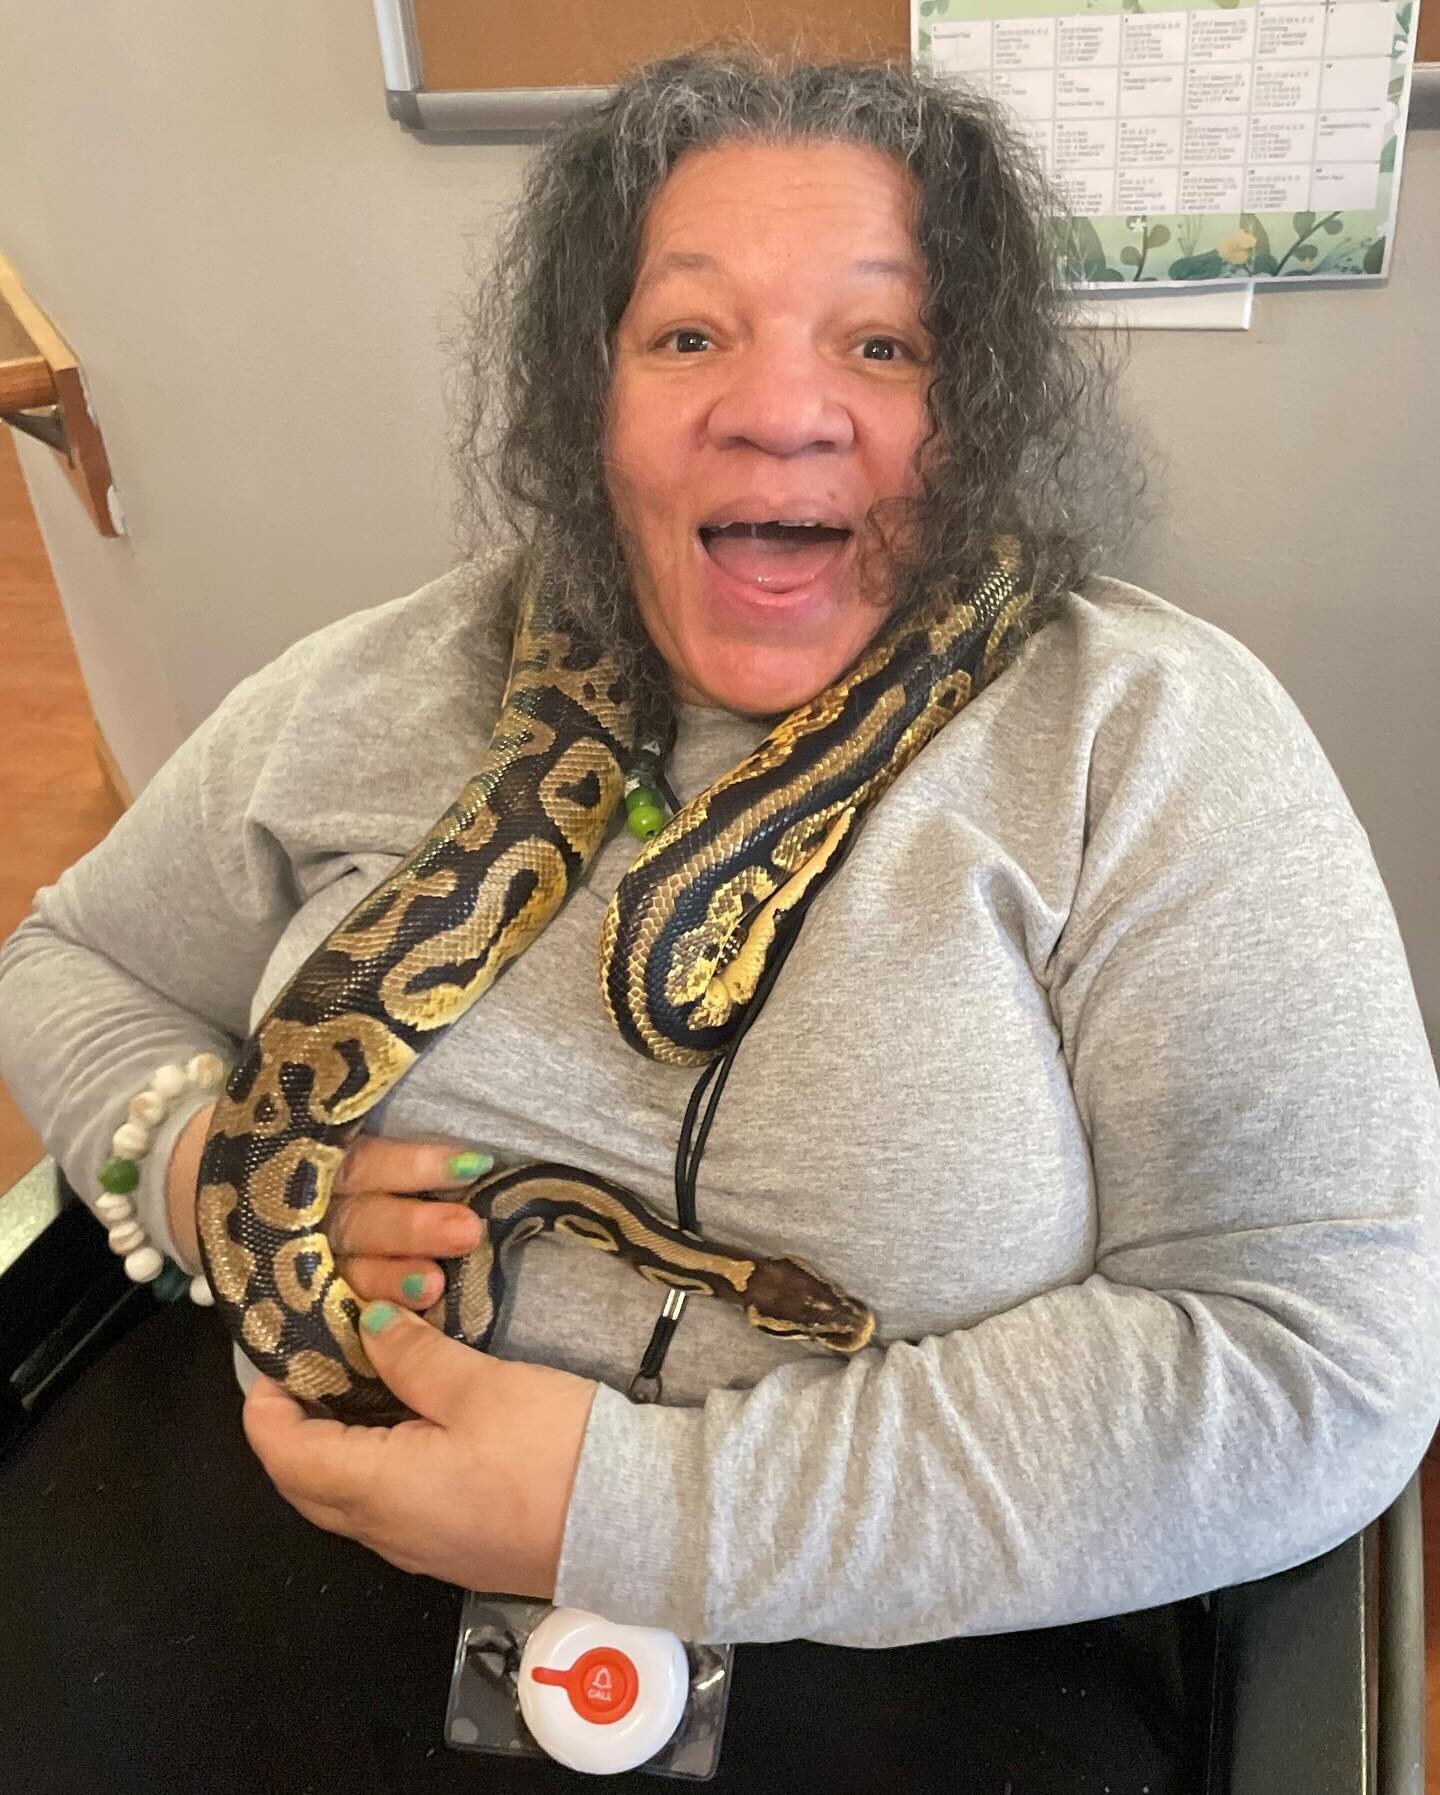 Our Residents got wild with Ms. Kim and her Amazing Animals - can&rsquo;t wait for her next visit! 🐍🐢
.
.
.
#assistedliving #seniorliving #memorycare